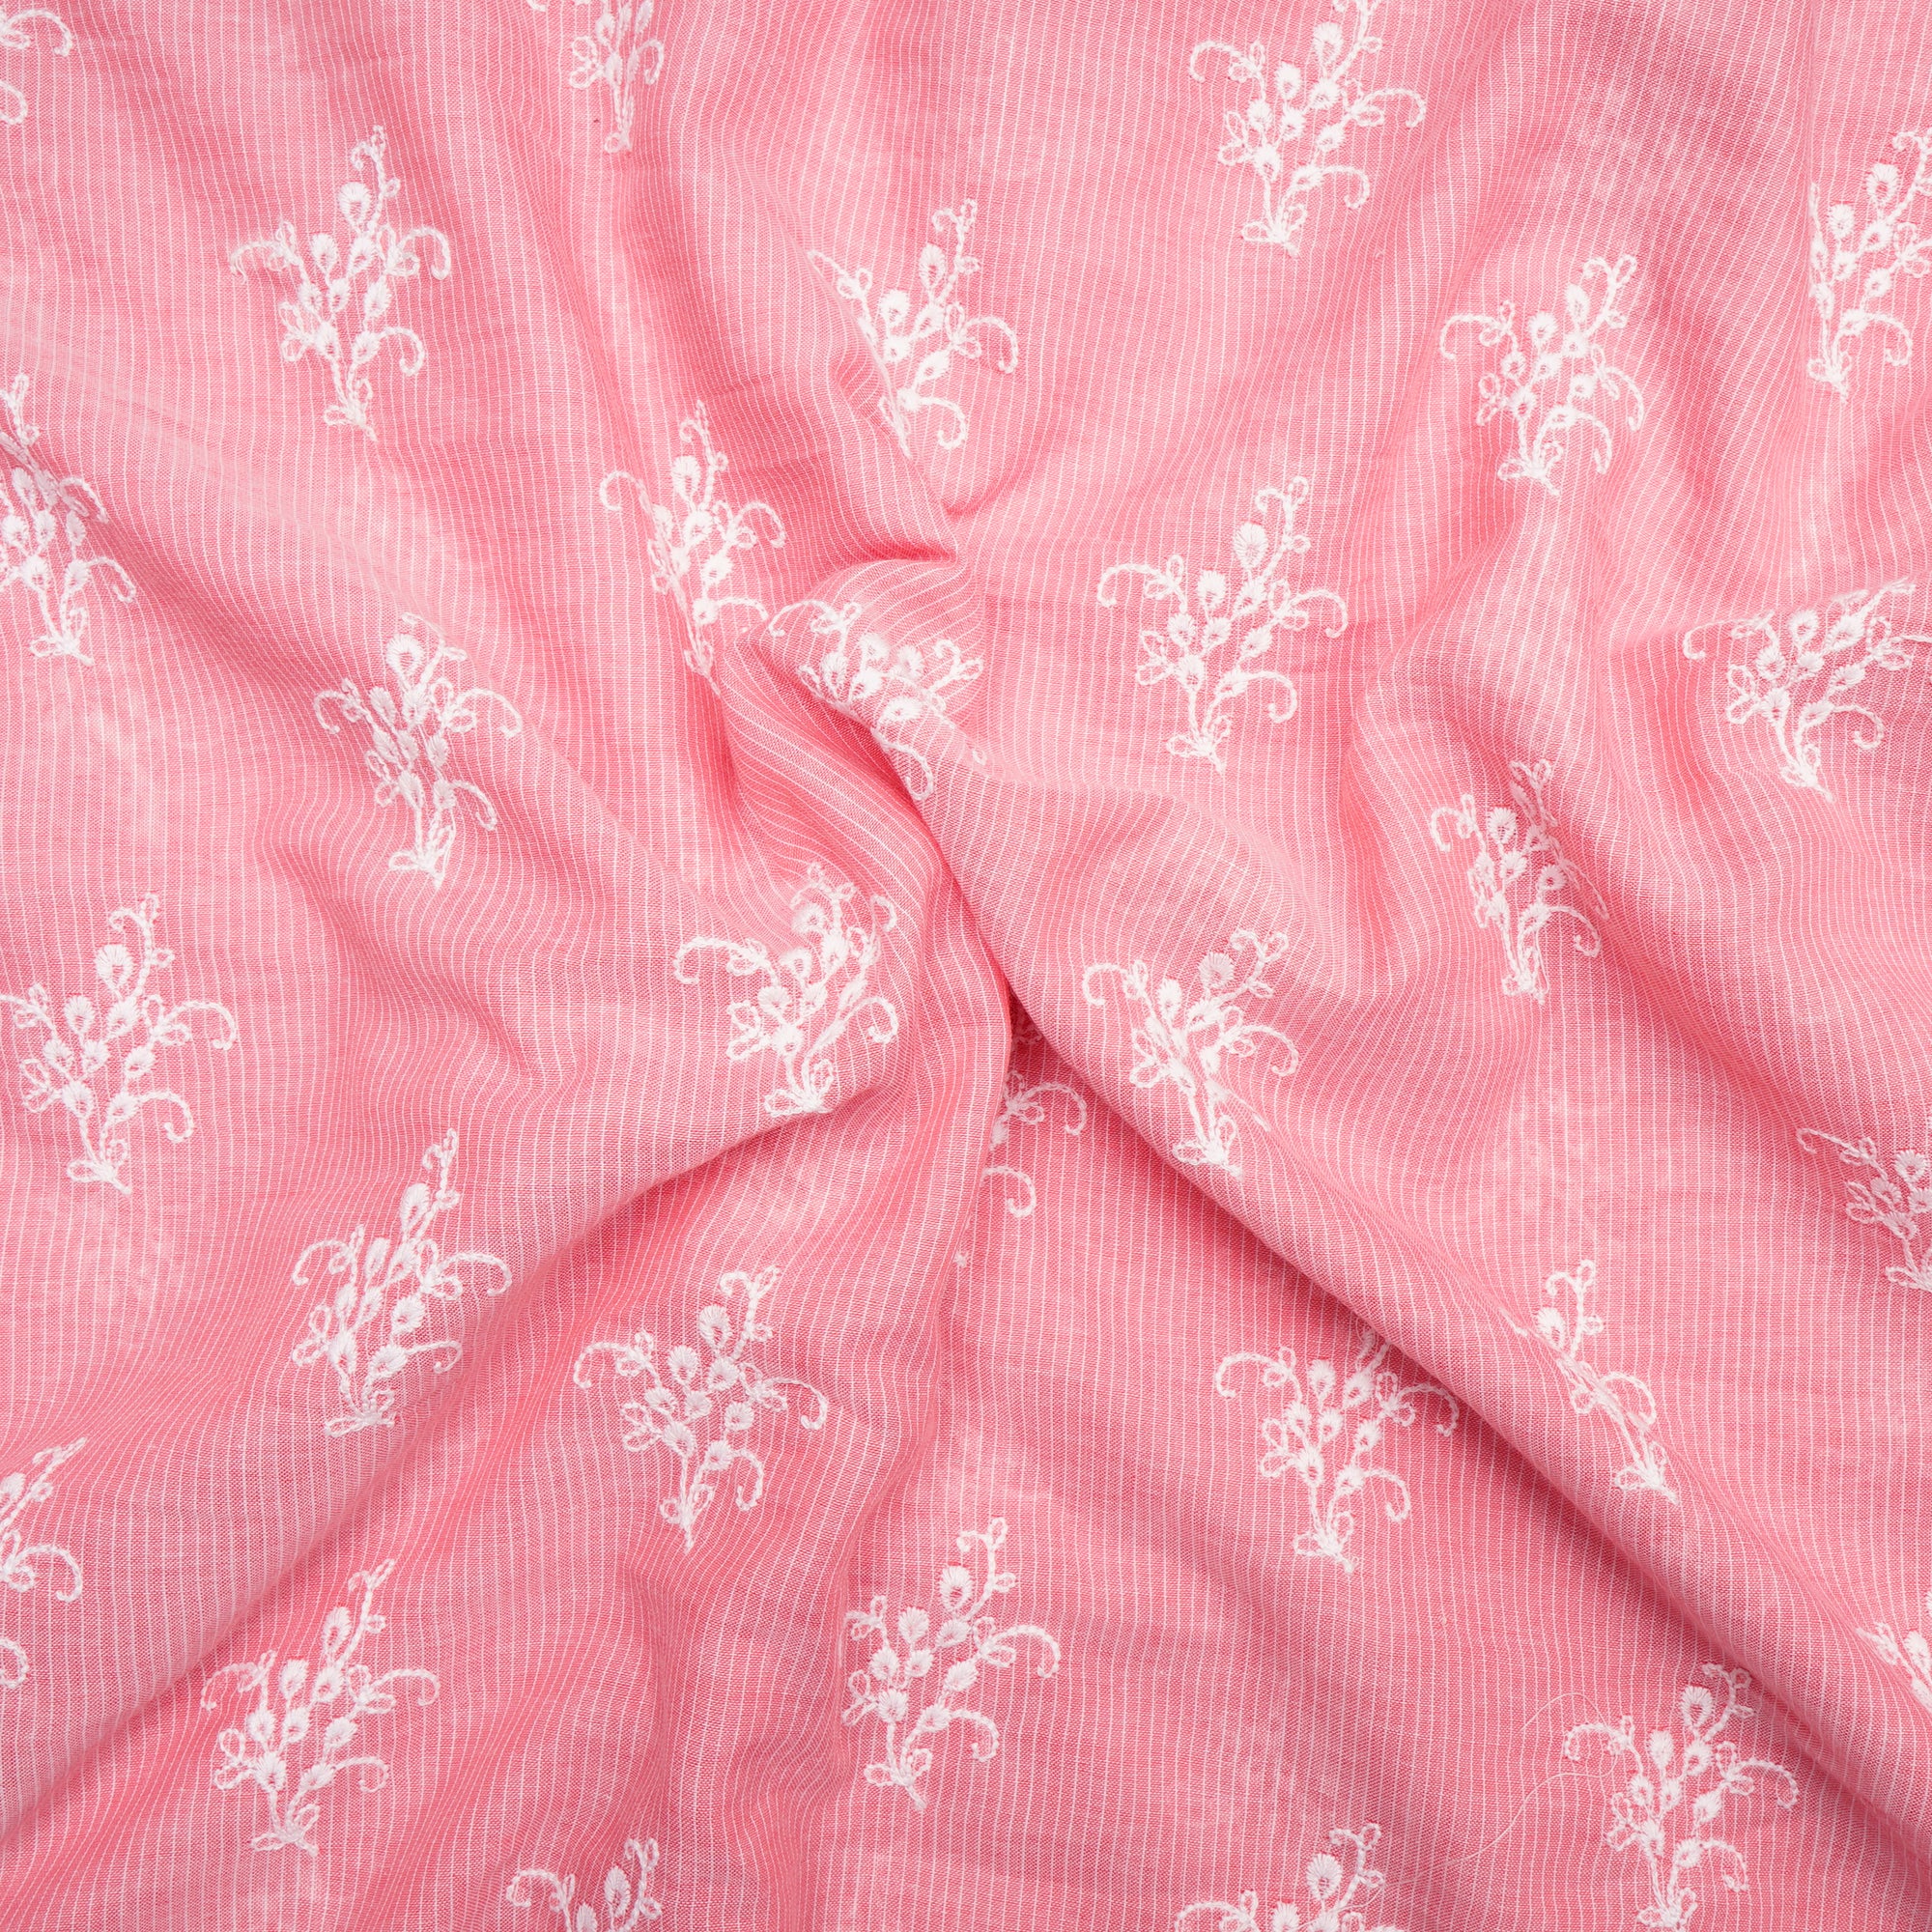 Blush Pink Floral Pattern Embroidered Voile Cotton Fabric